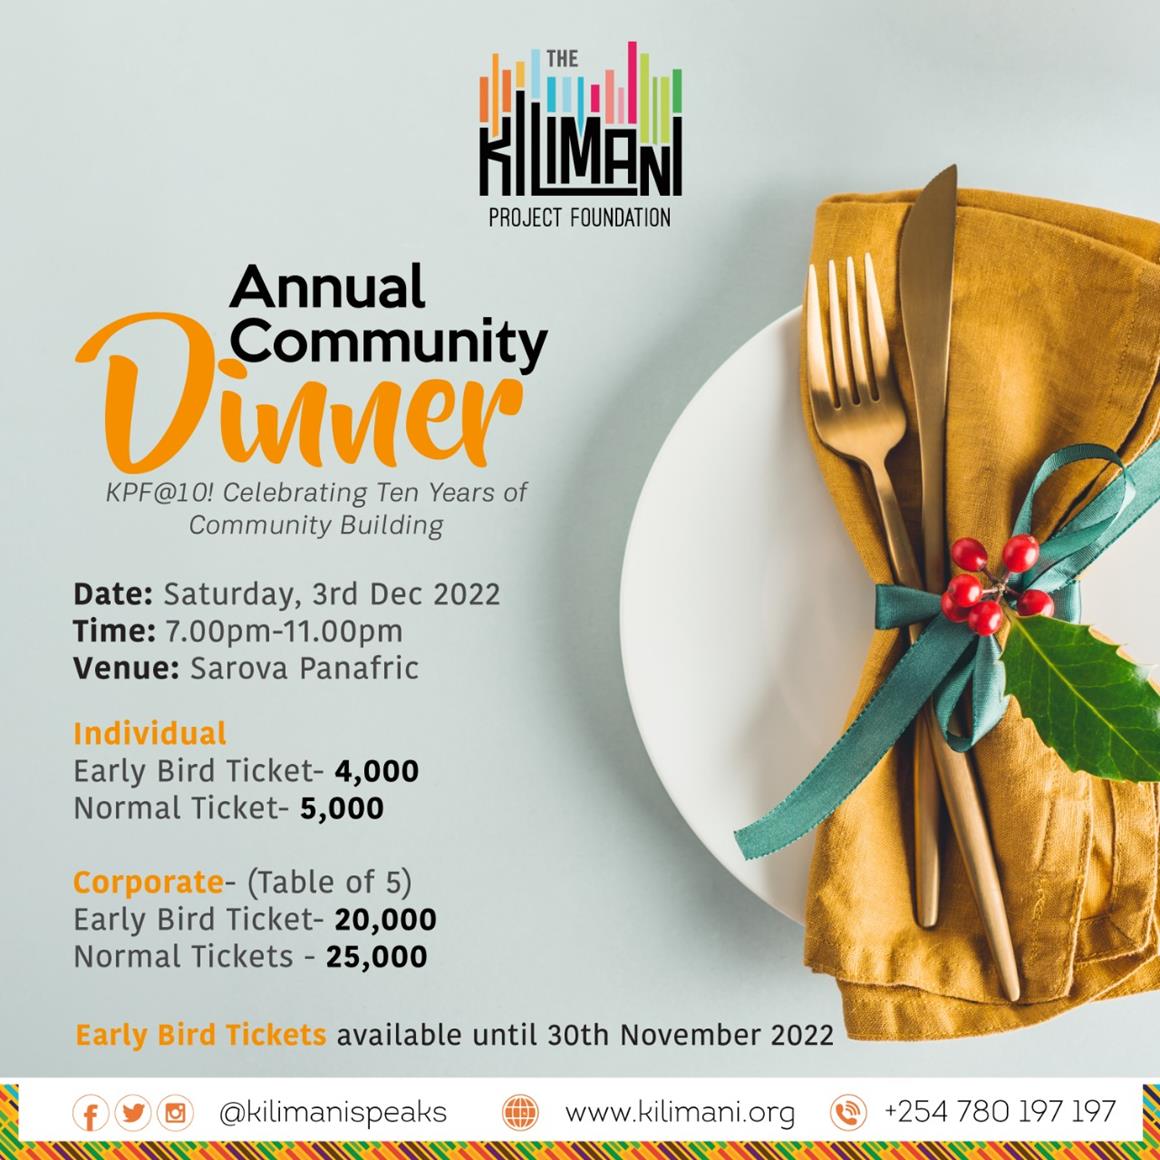 Kilimani Project Foundation: Annual Community Dinner